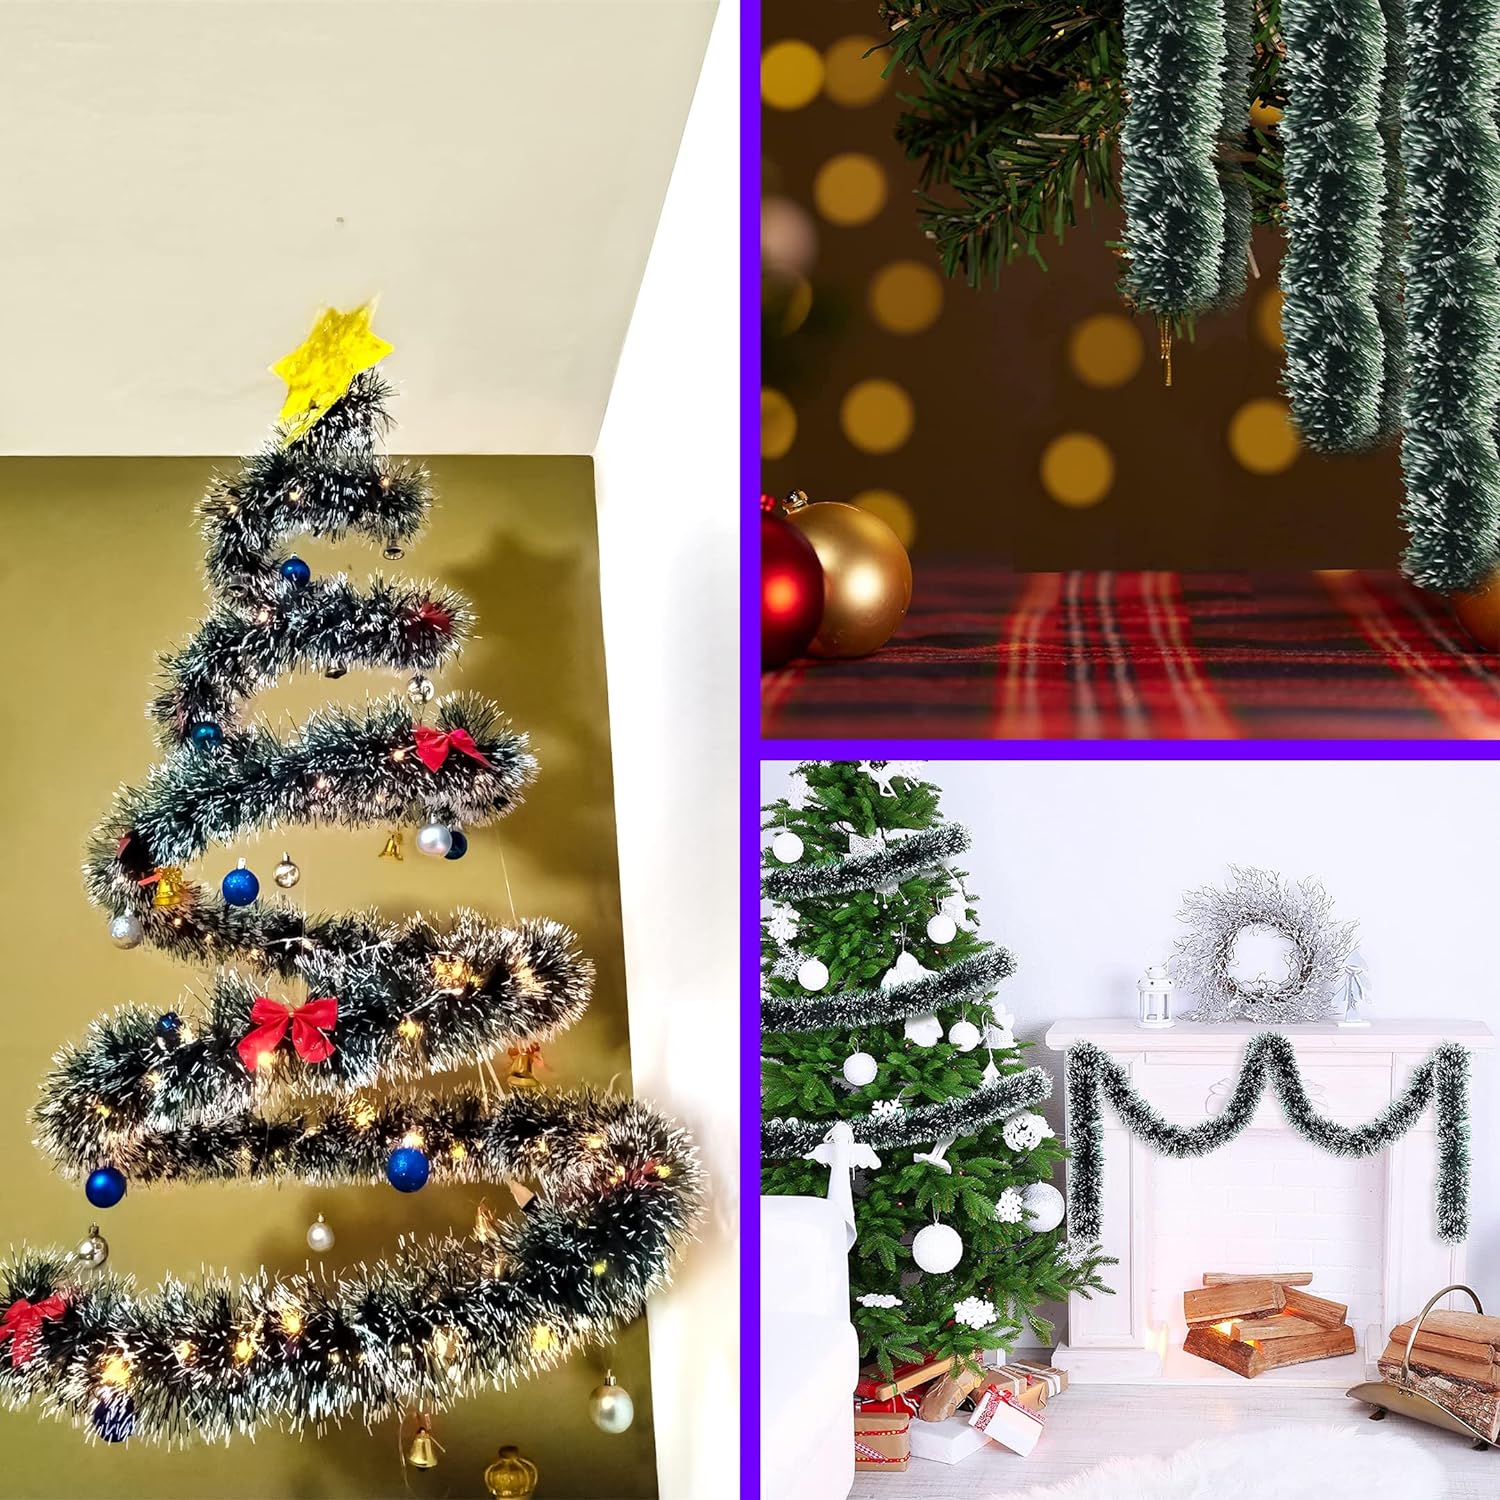 Christmas décor kit to leave a lasting impression